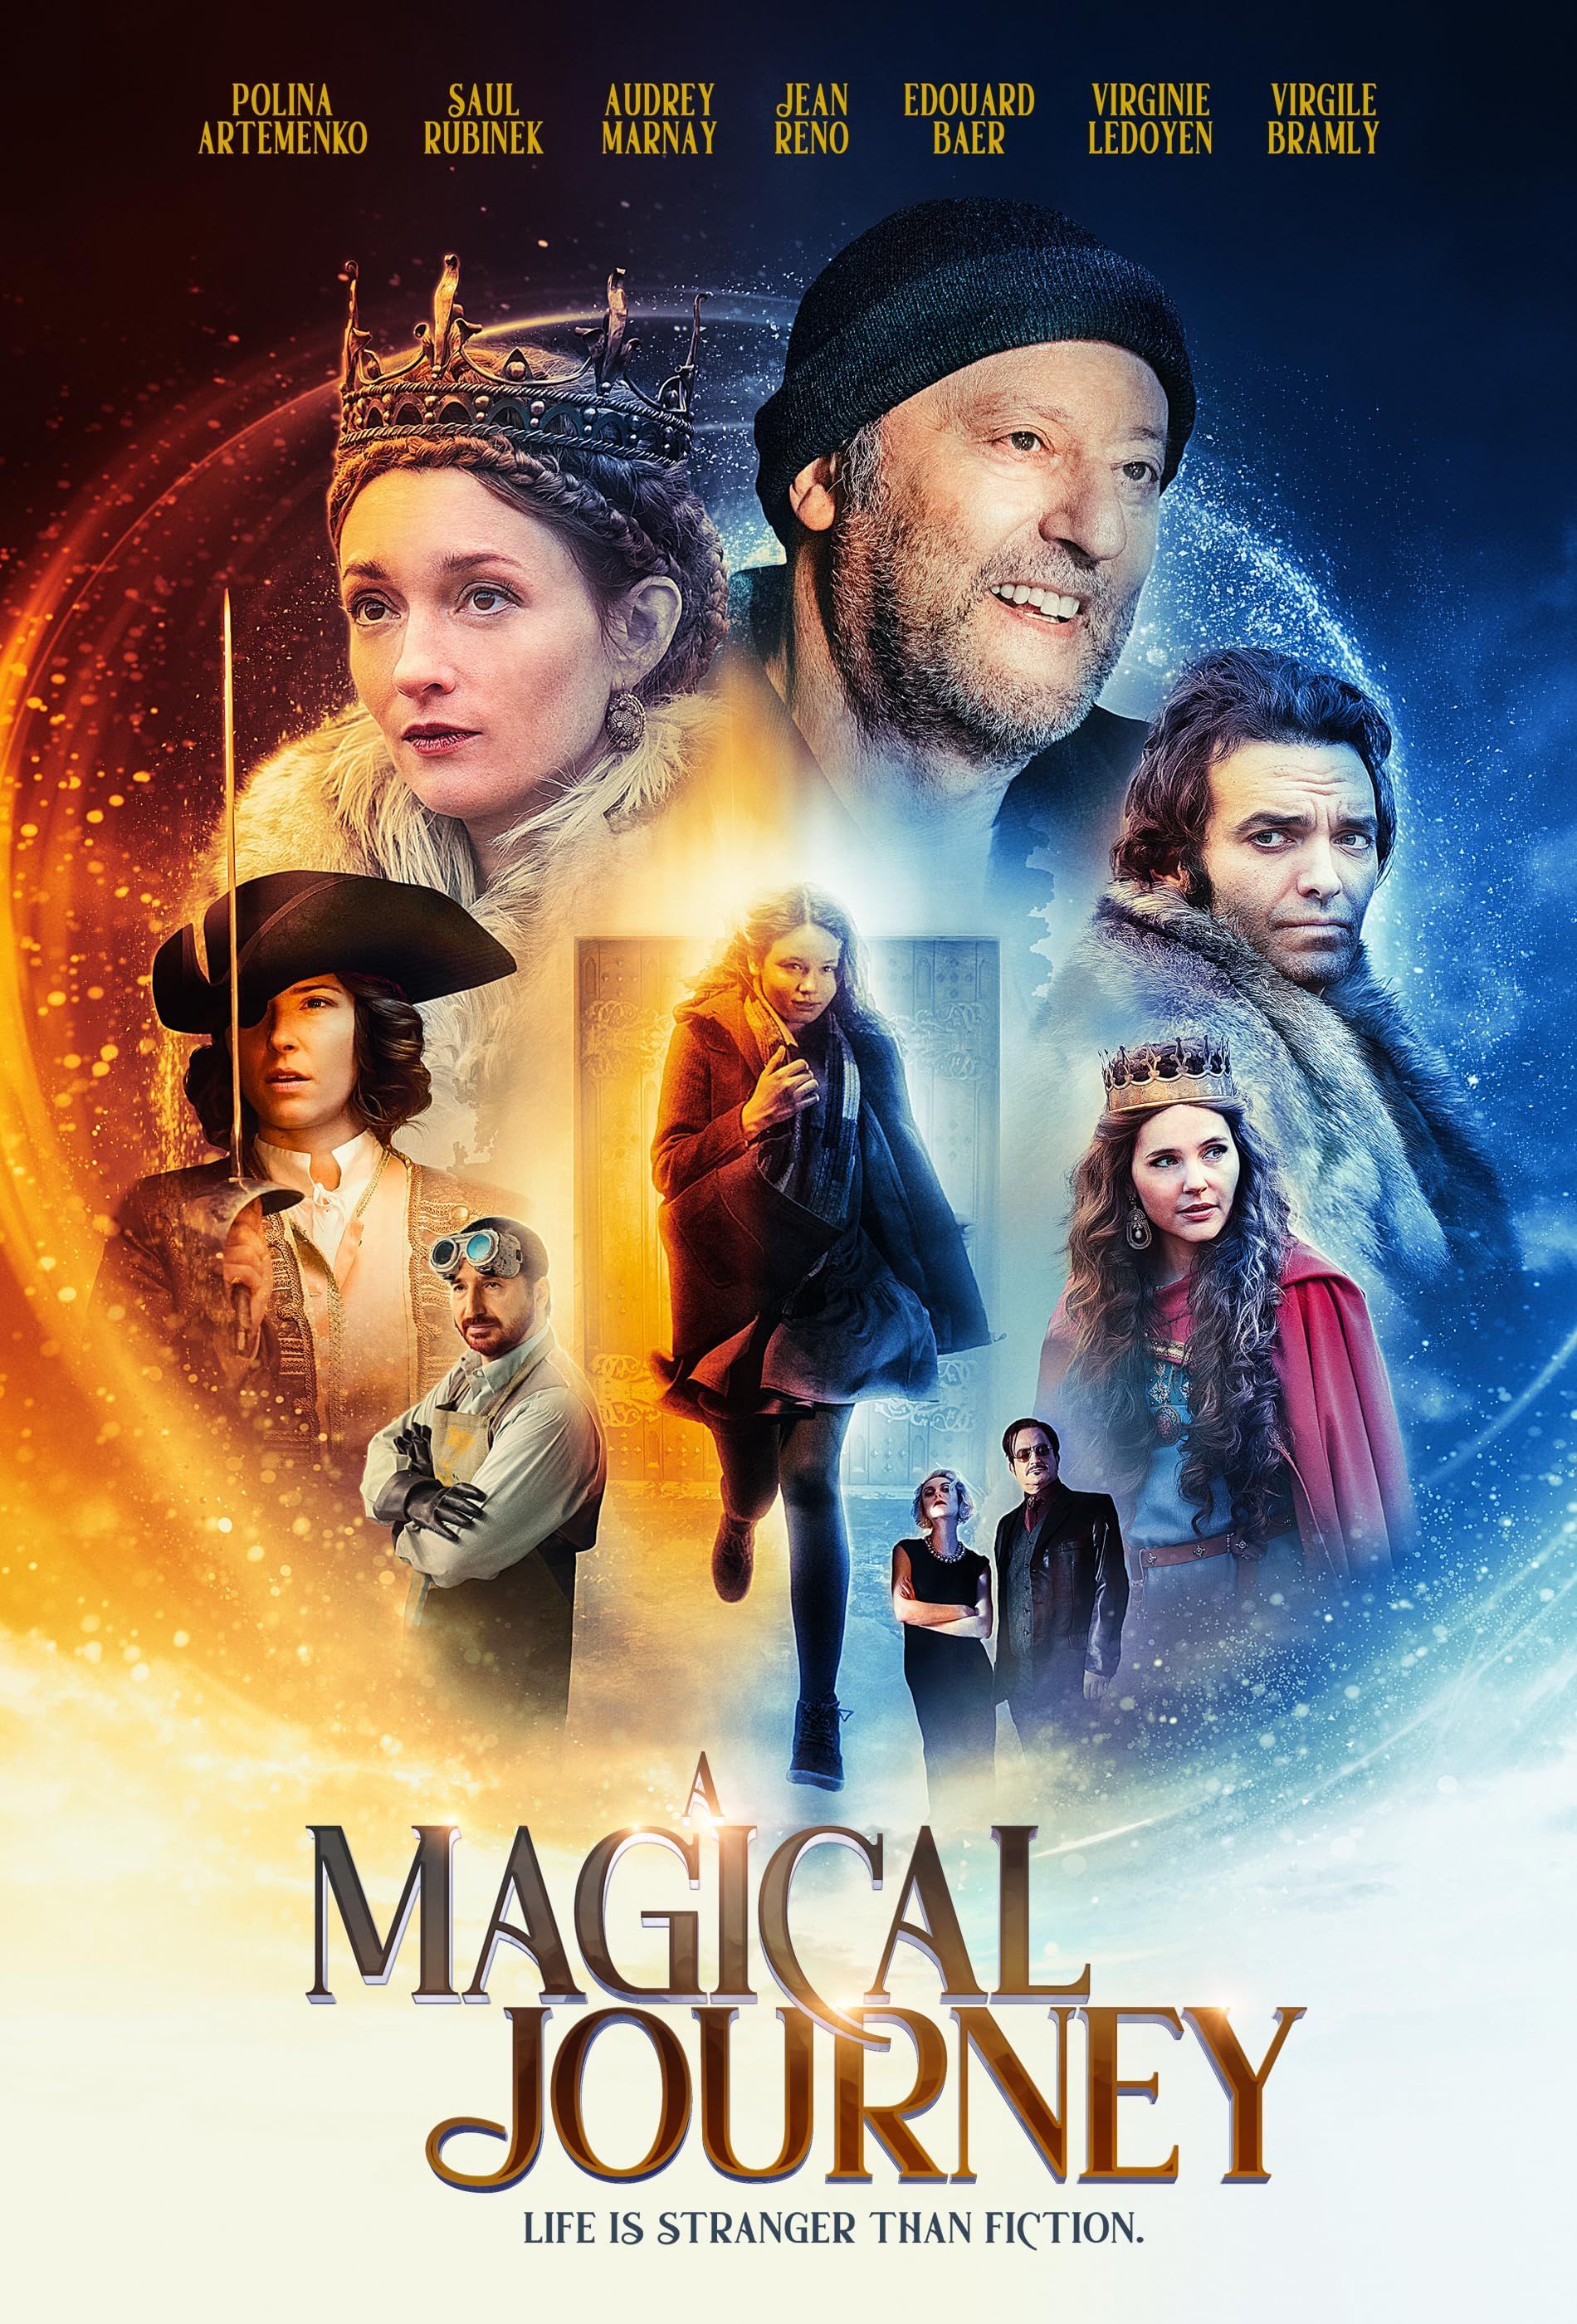 A Magical Journey (2019) Hindi Dubbed ORG BluRay Full Movie 720p 480p